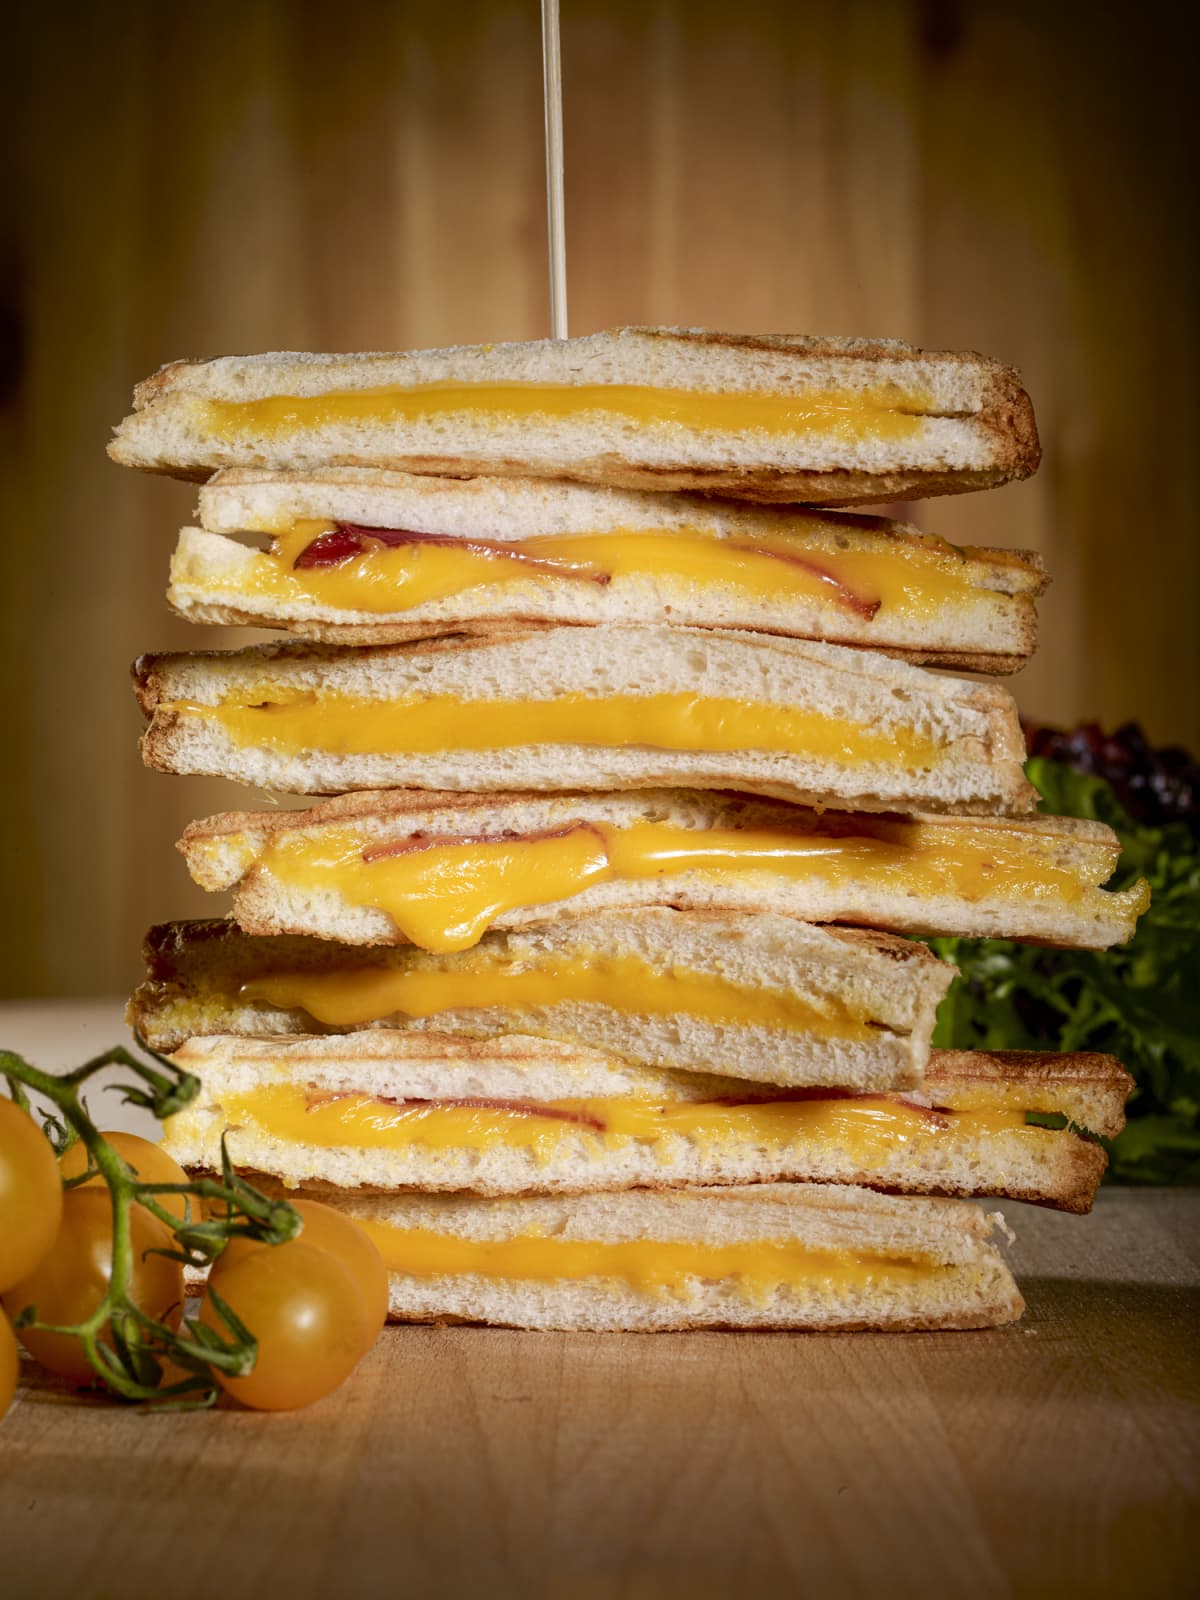 Tack of grilled cheese sandwiches